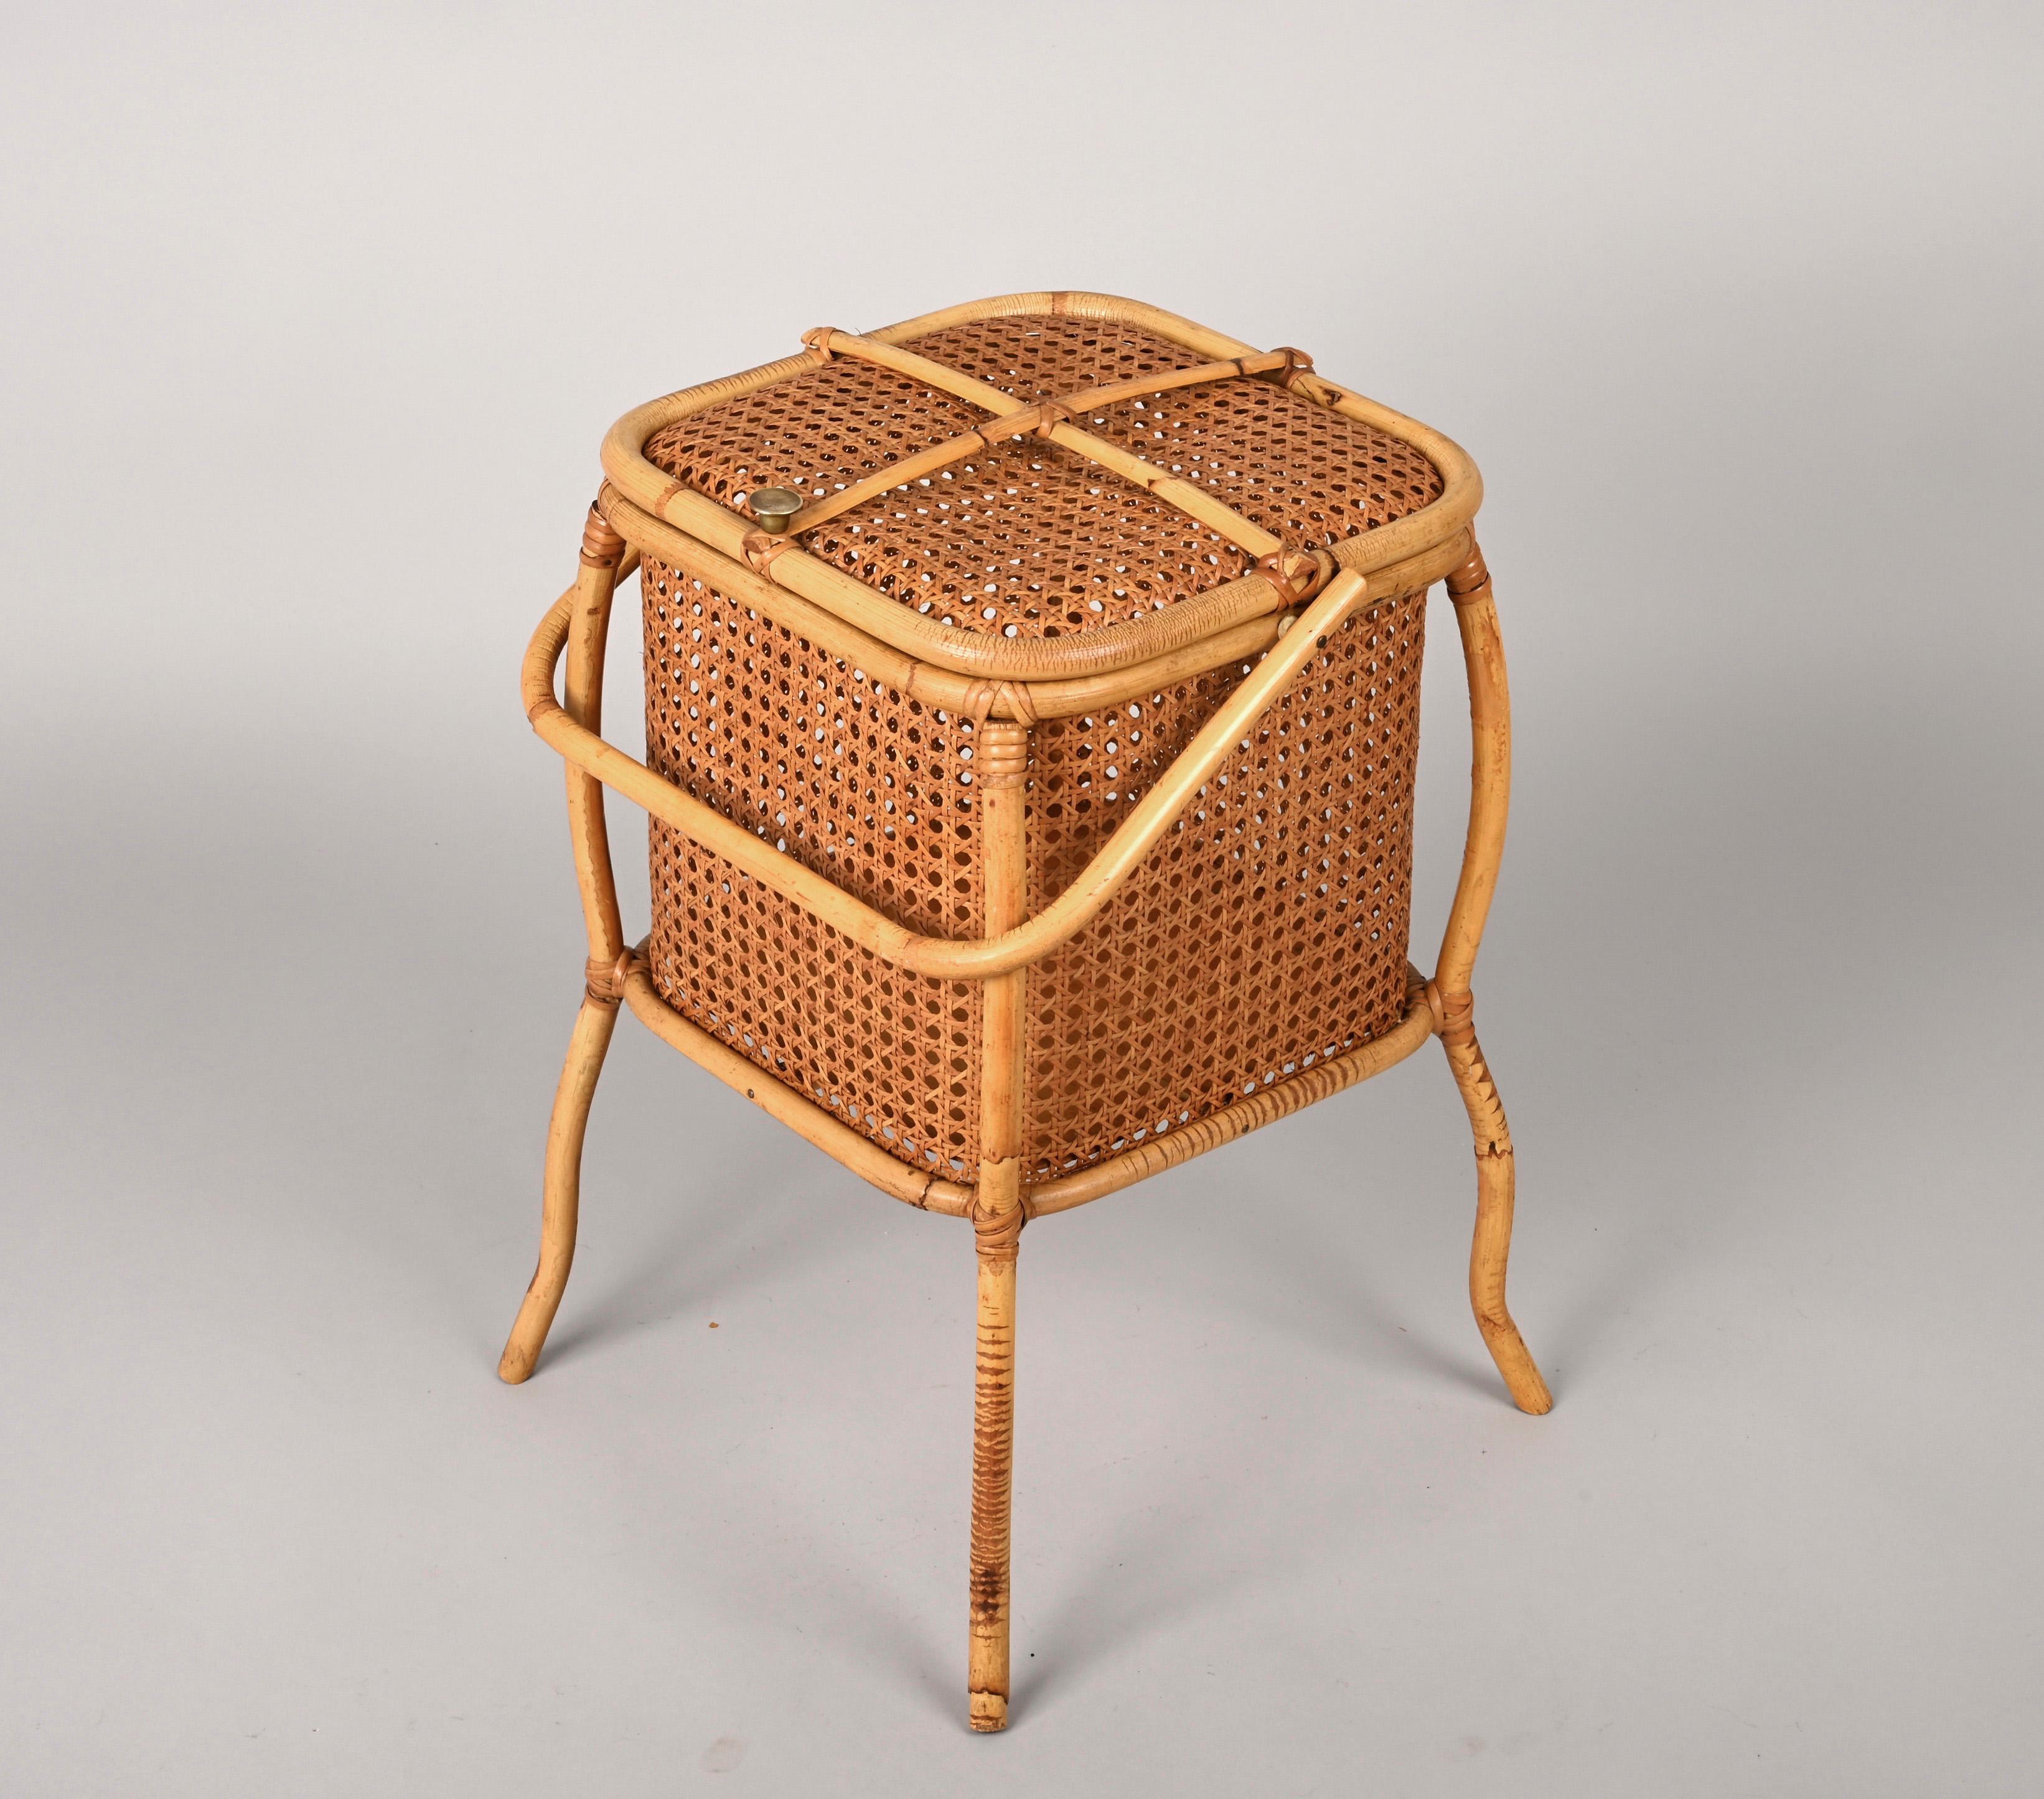 Midcentury Bamboo, Wicker and Vienna Straw Cubic Italian Magazine Basket, 1960s For Sale 4